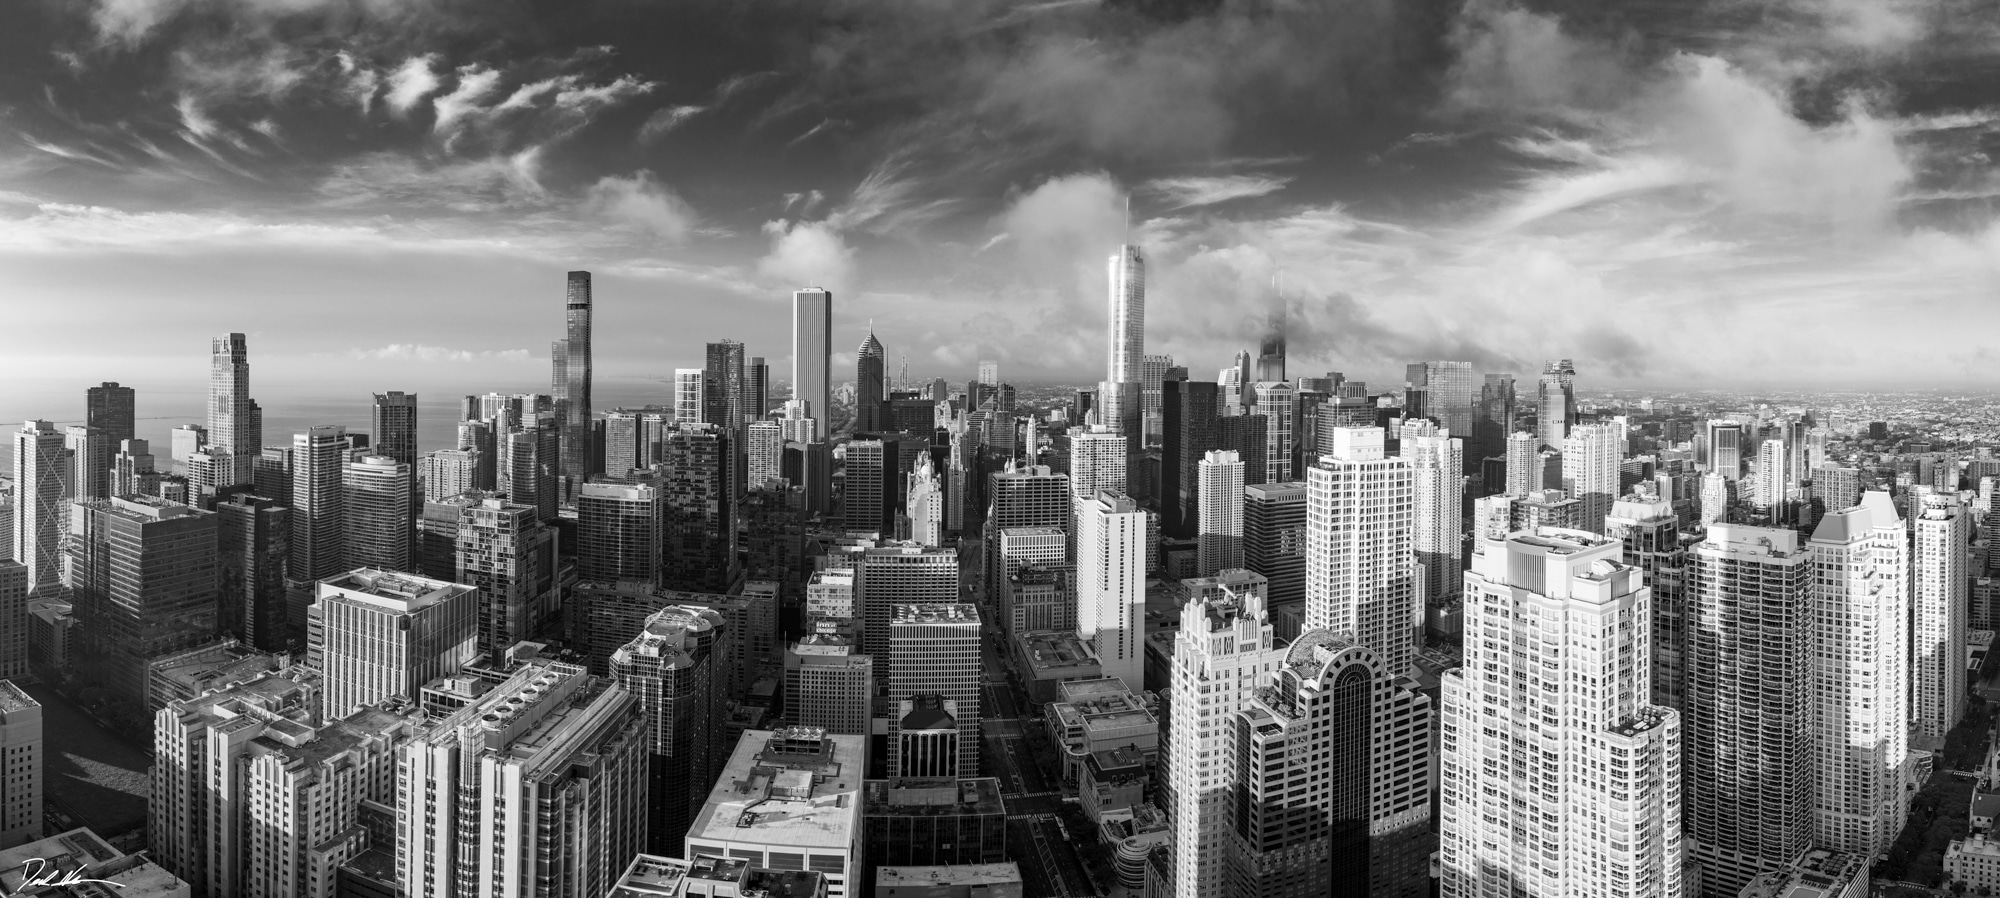 large panoramic black and white image of Chicago taken high above the city from Chicago Avenue looking south over the whole city